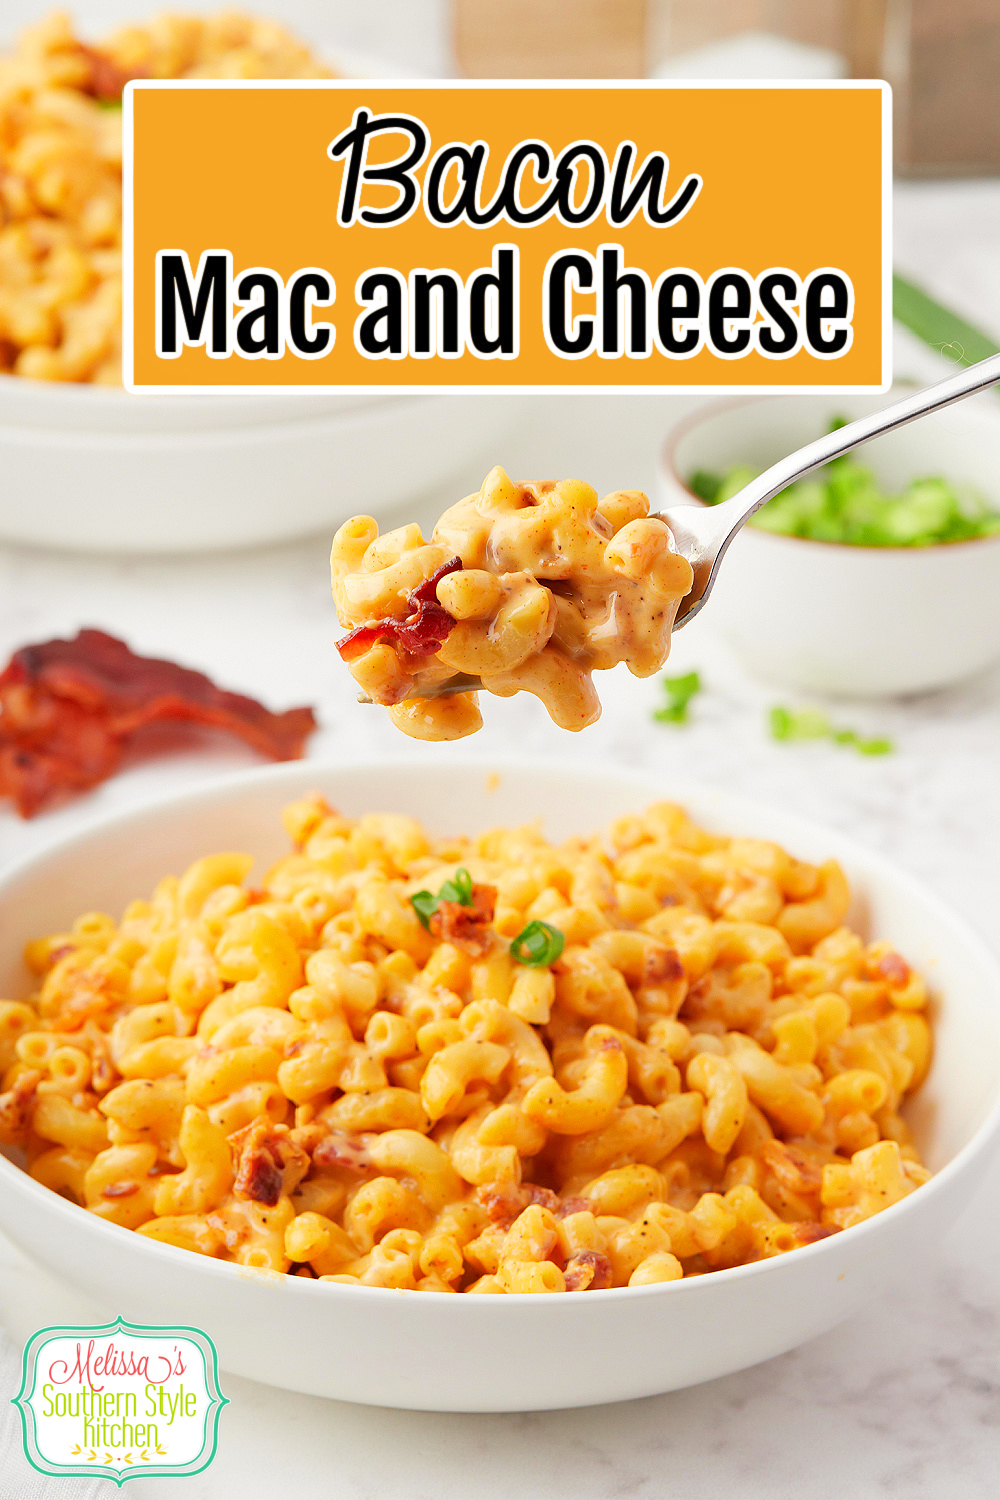 This Easy Bacon Mac and Cheese recipe can be served as a delicious main dish or a side dish for busy day meals with the family. #macaroniandcheese #baconmac #baconmacandcheese #macaronirecipes #bacon #southernmacaroniandcheese #stovetopmacandcheese